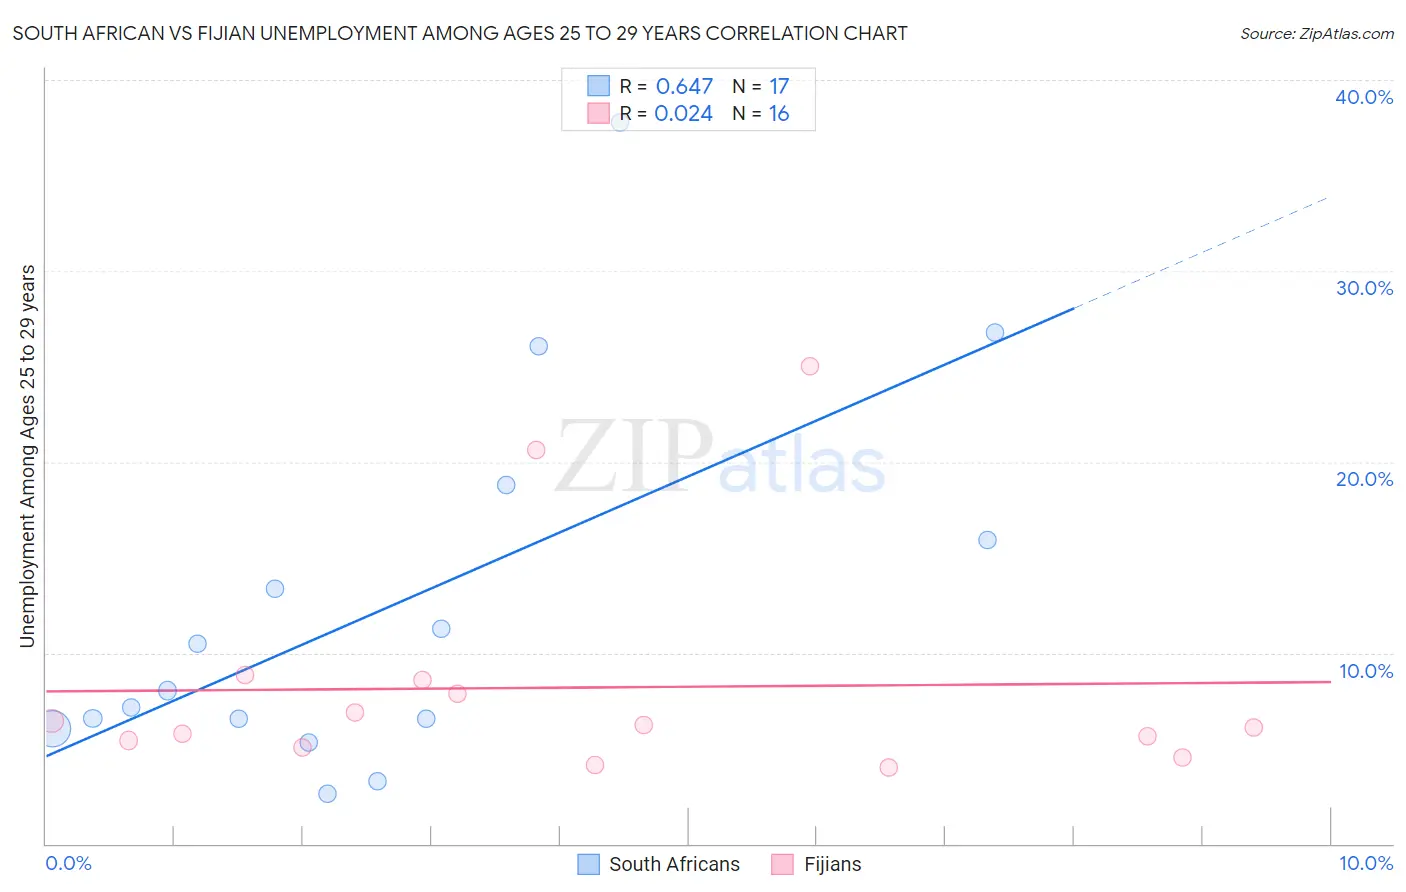 South African vs Fijian Unemployment Among Ages 25 to 29 years